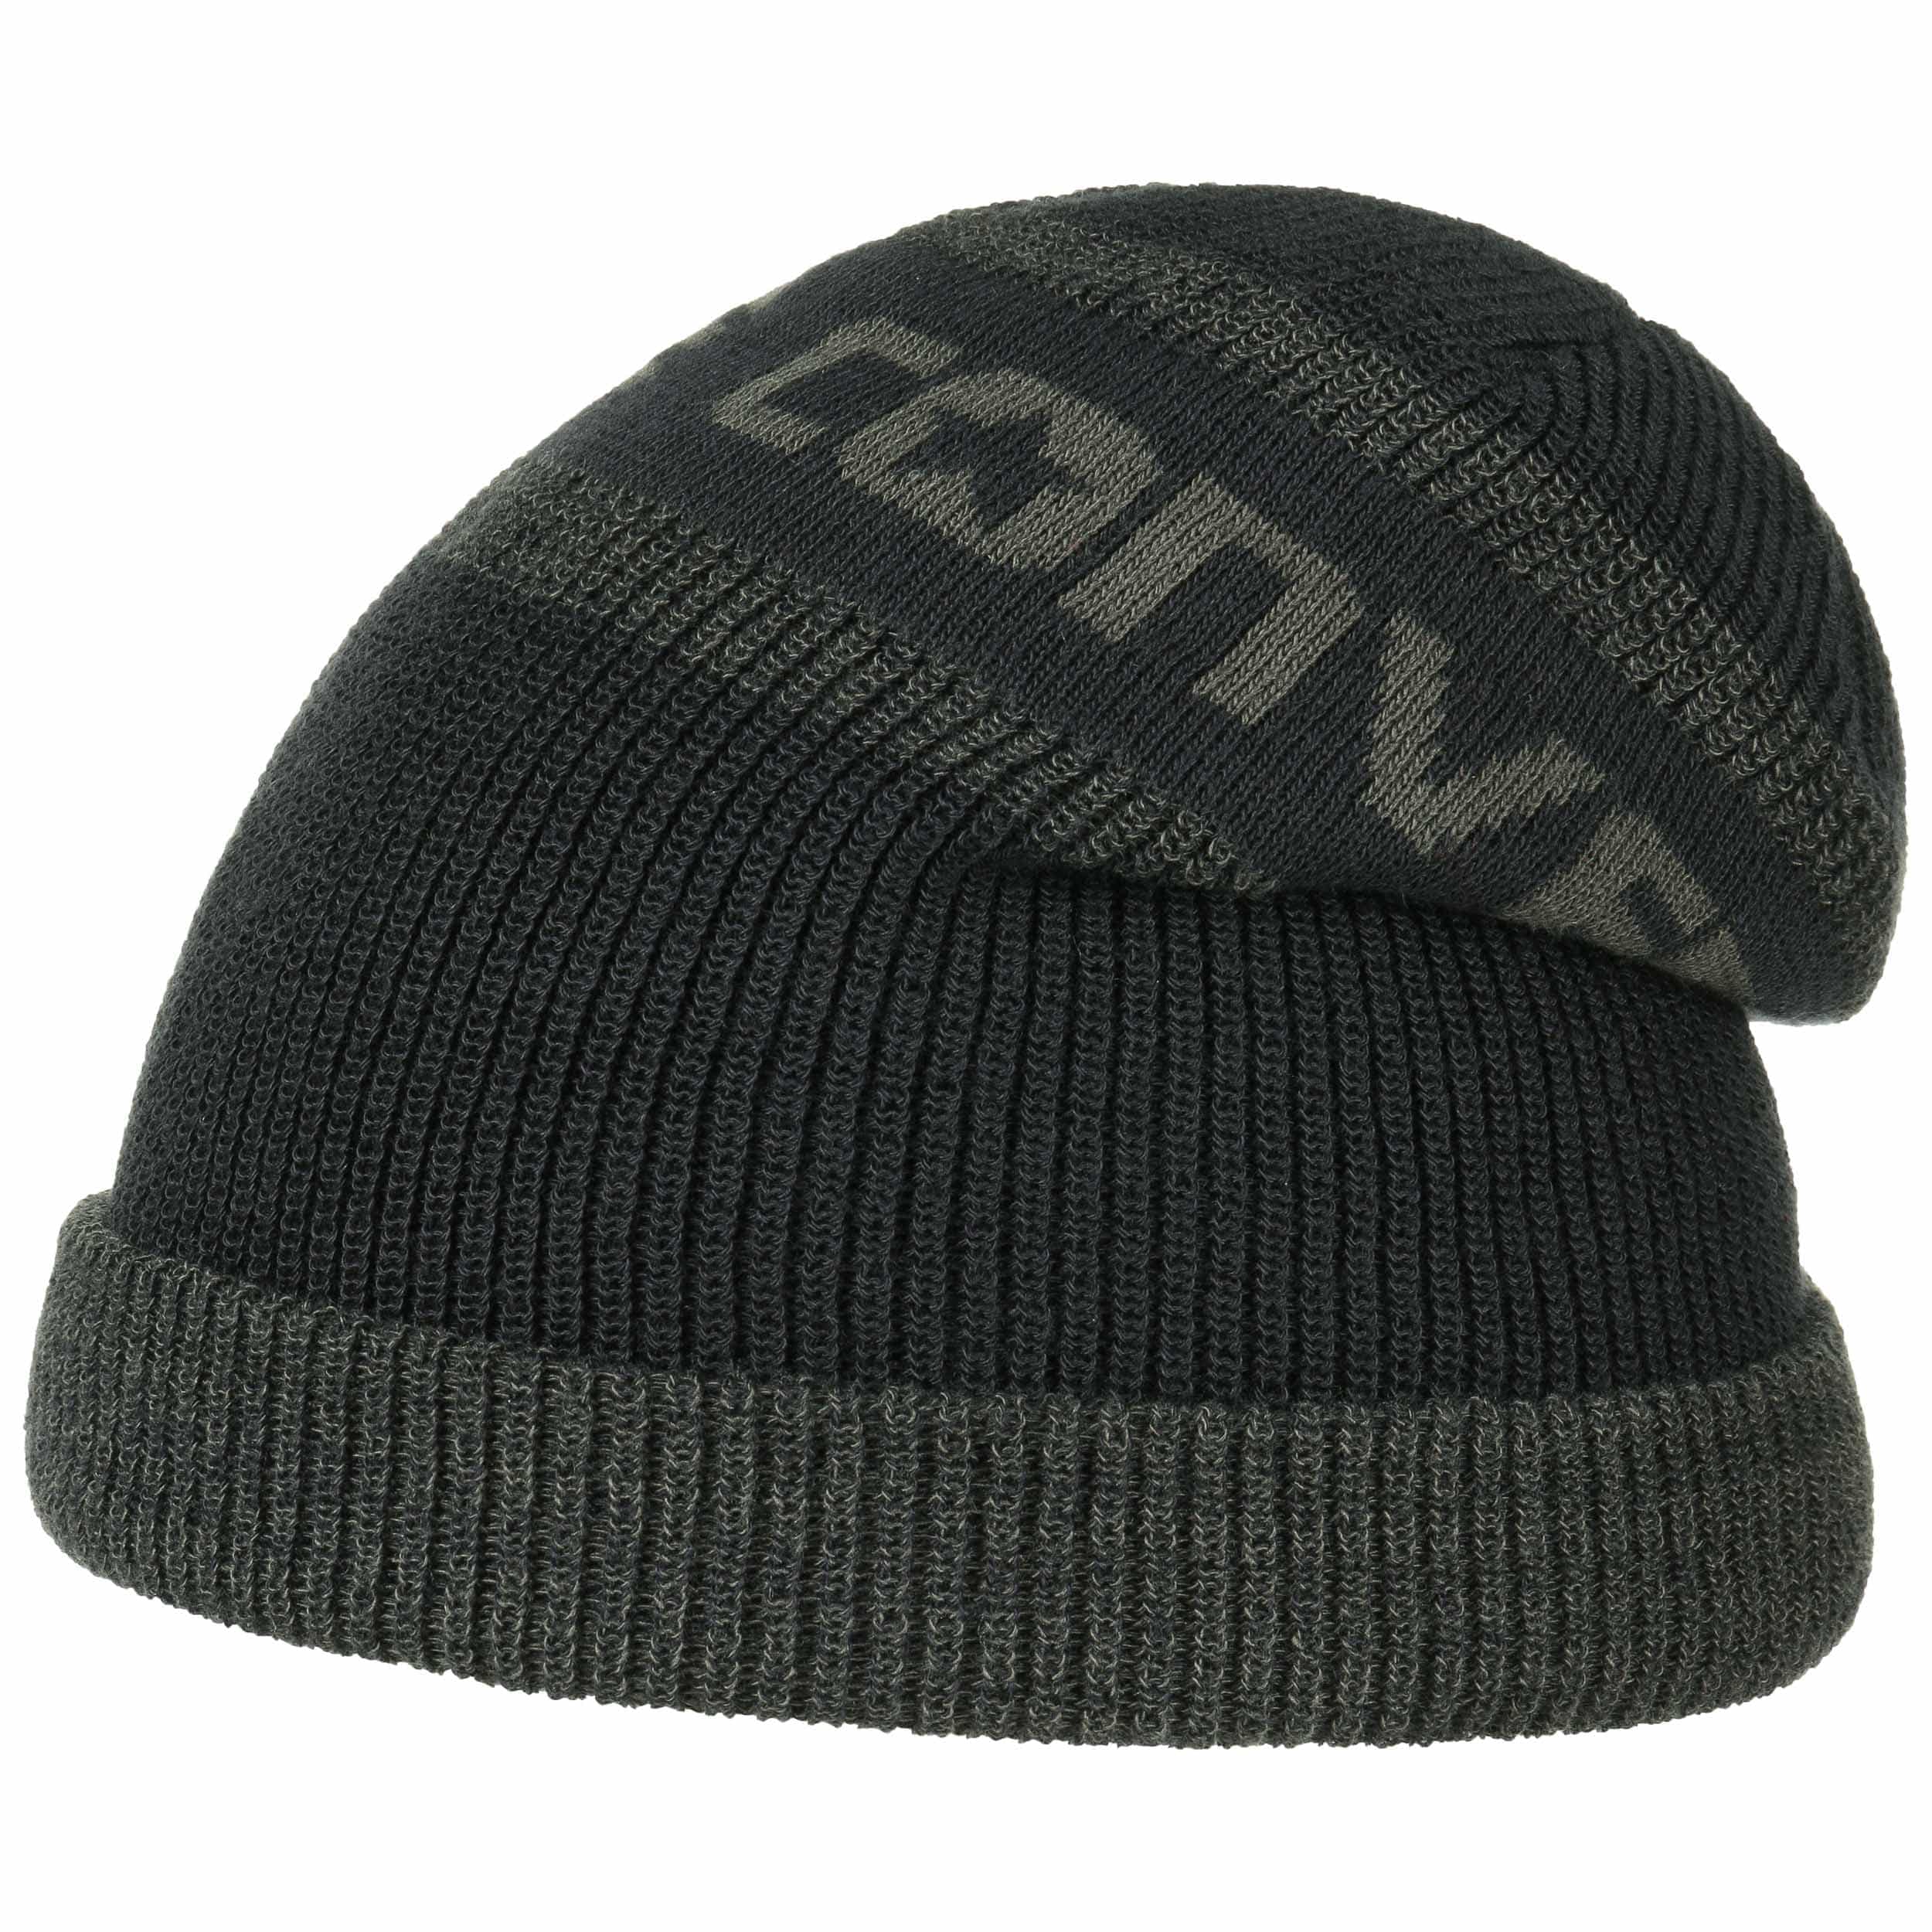 Jaquard Knit Beanie by Converse - 21,95